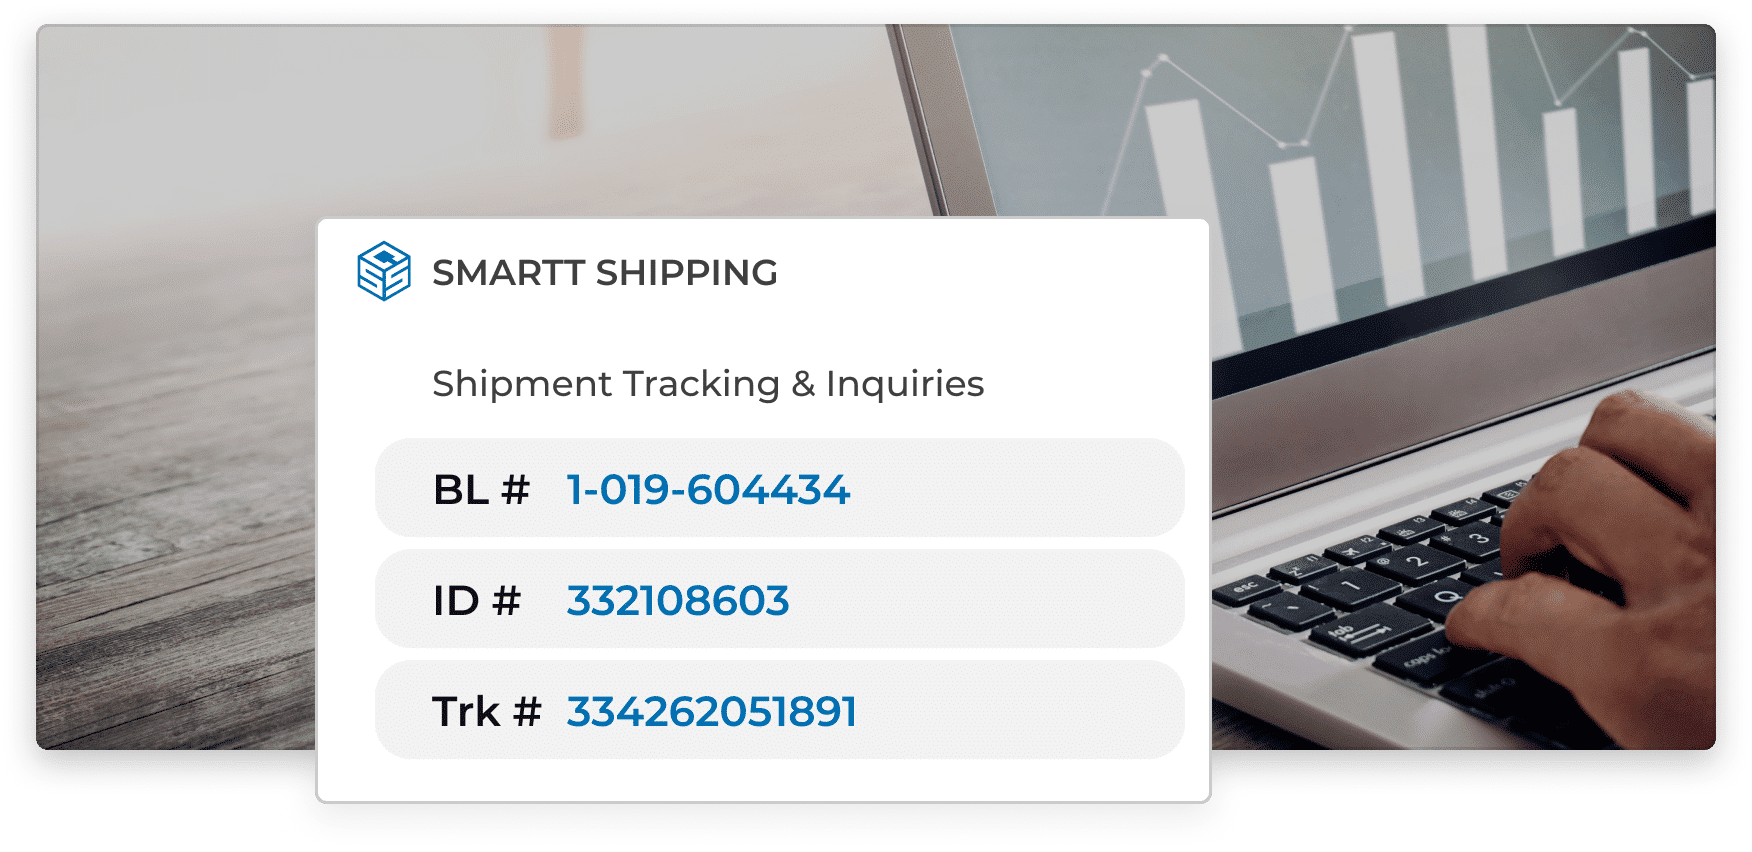 You can easily track one of your LTL or Parcel shipments using SMARTT Shipping.